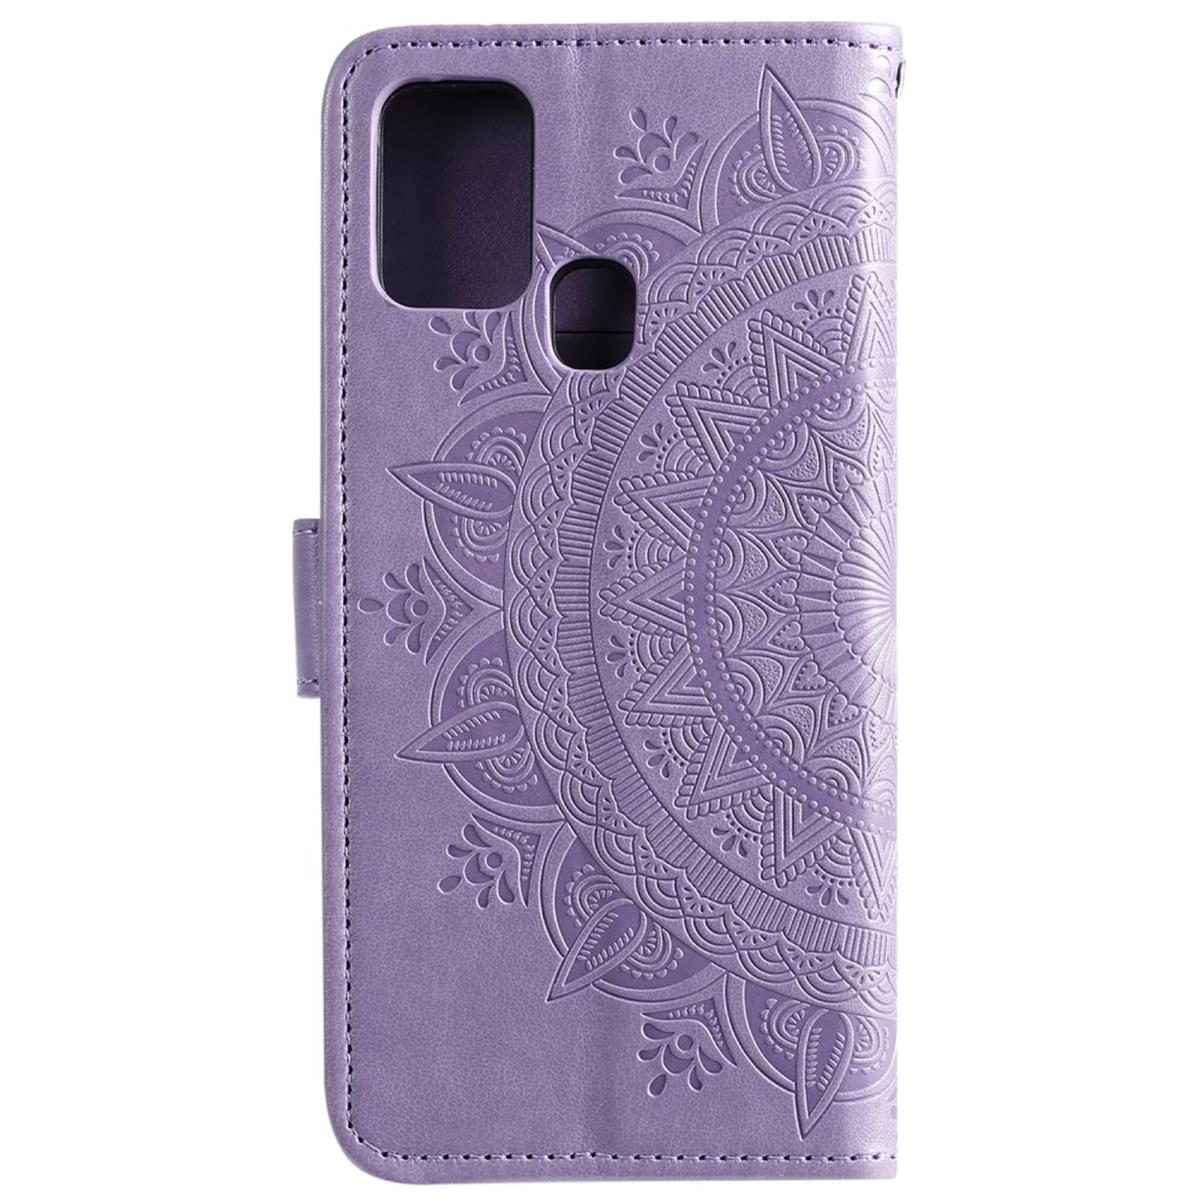 mit COVERKINGZ Muster, Bookcover, Klapphülle Mandala Lila Huawei, Y6p,